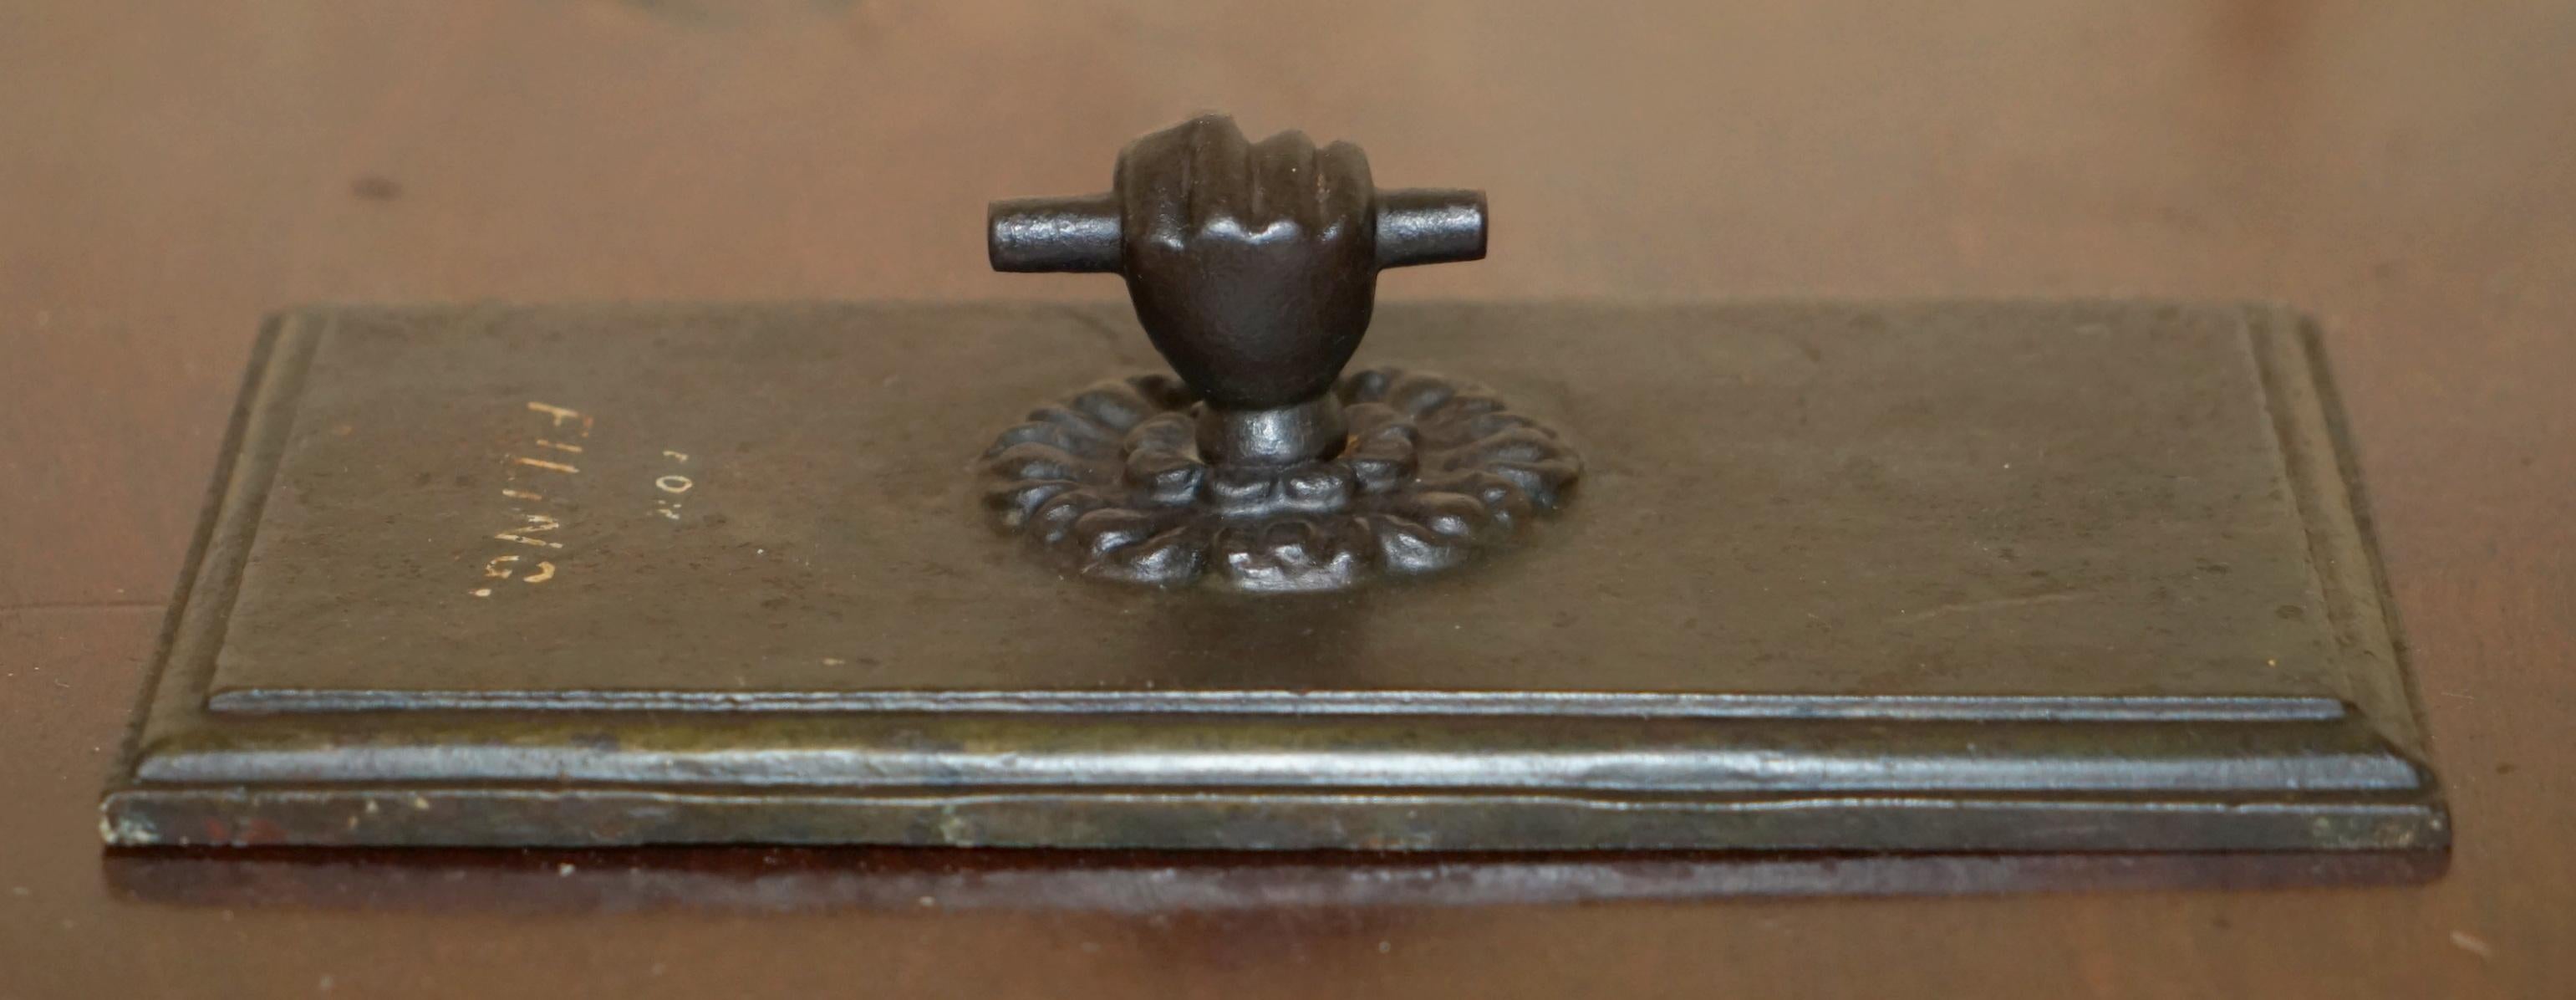 RARE ANTIQUE VICTORIAN A KENRICK & SONS N°5 CLENCHED FIST BRONZE PAPERWEIGHt For Sale 4